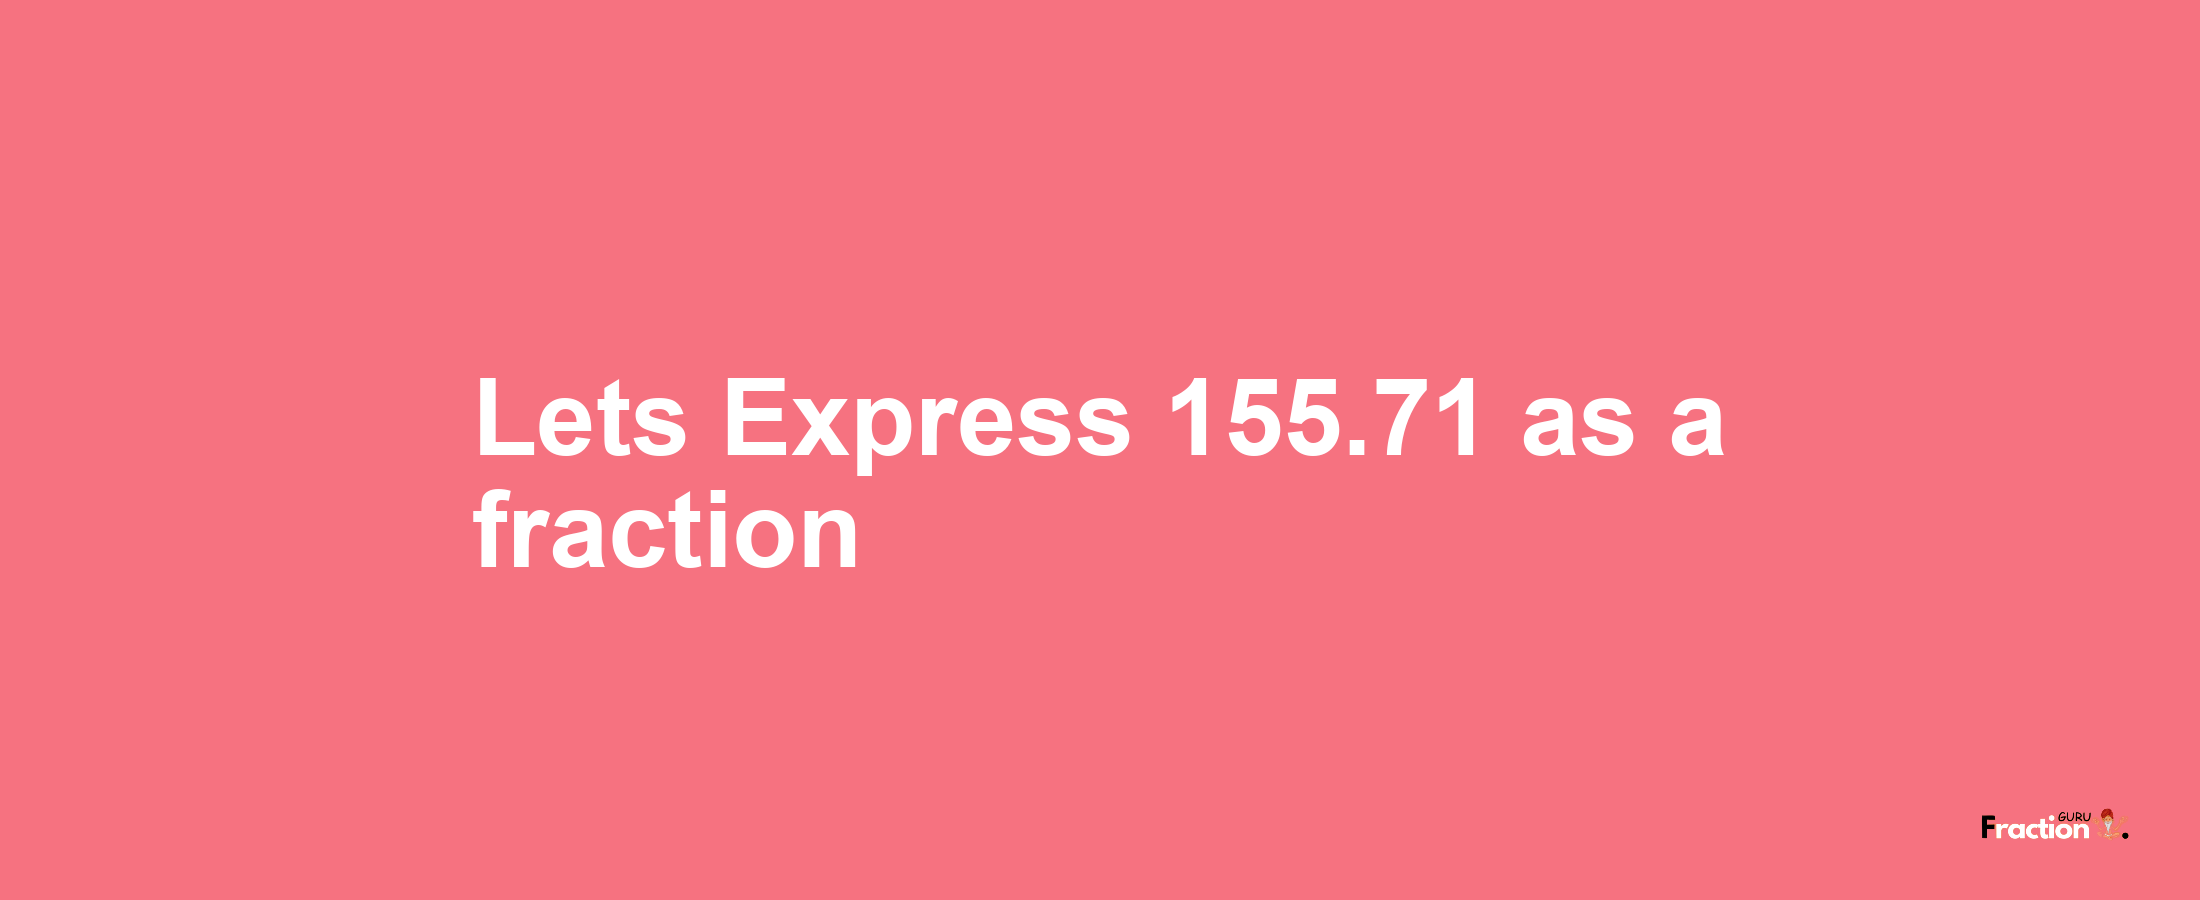 Lets Express 155.71 as afraction